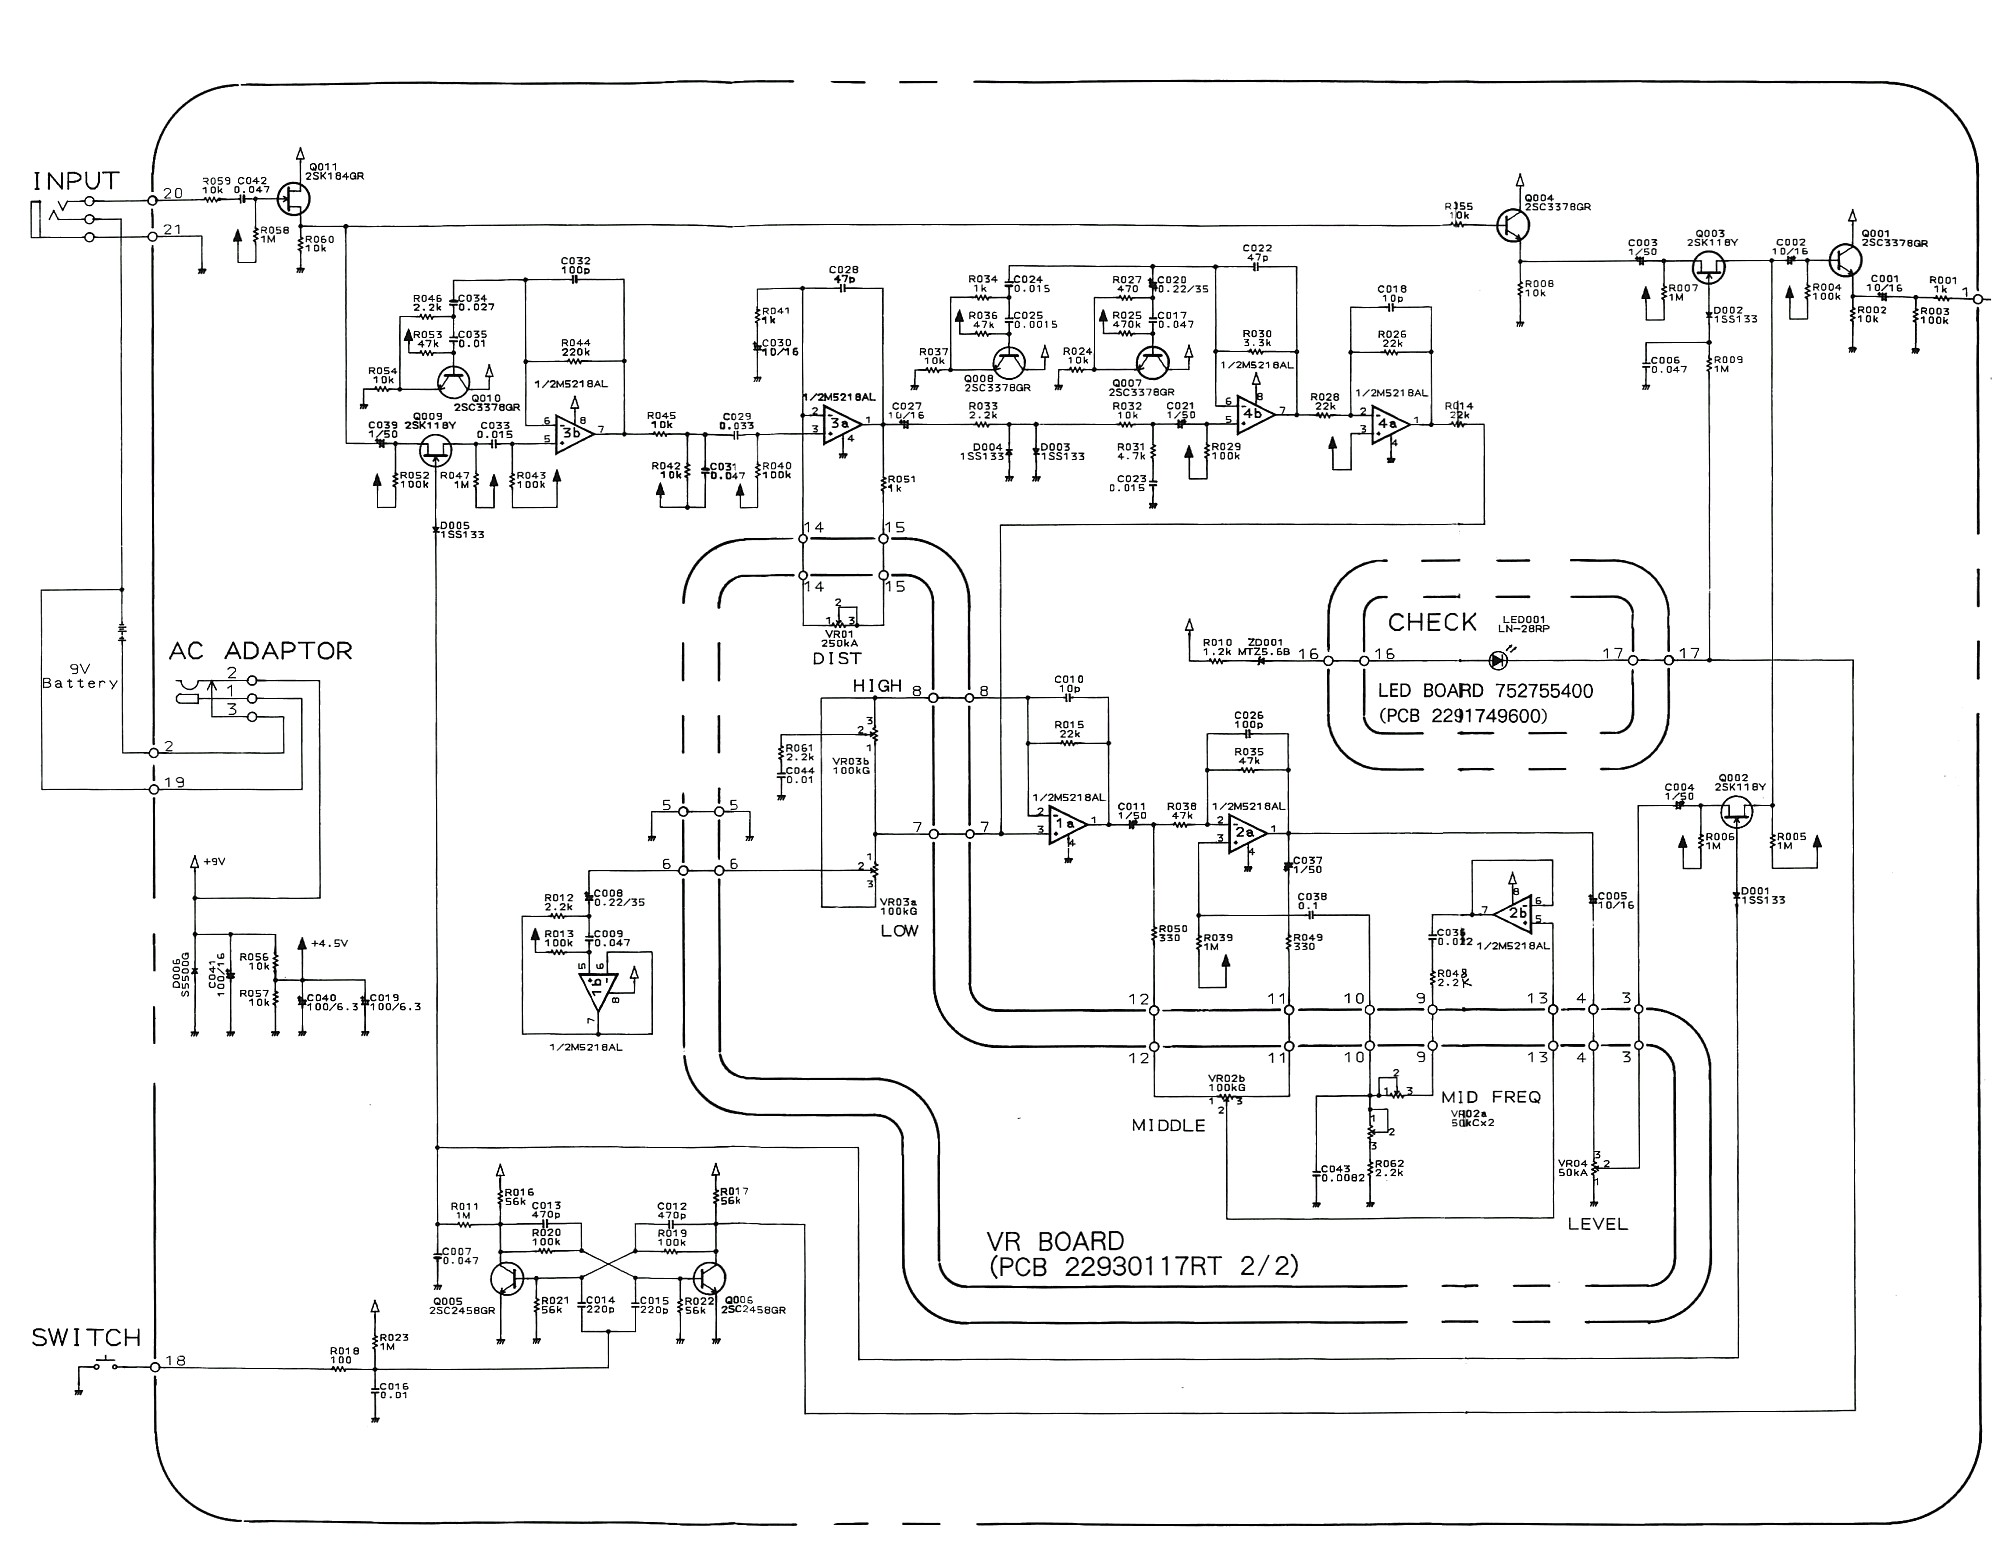 Schematic diagram of Boss MT 2 Metal Zone distortion pedal